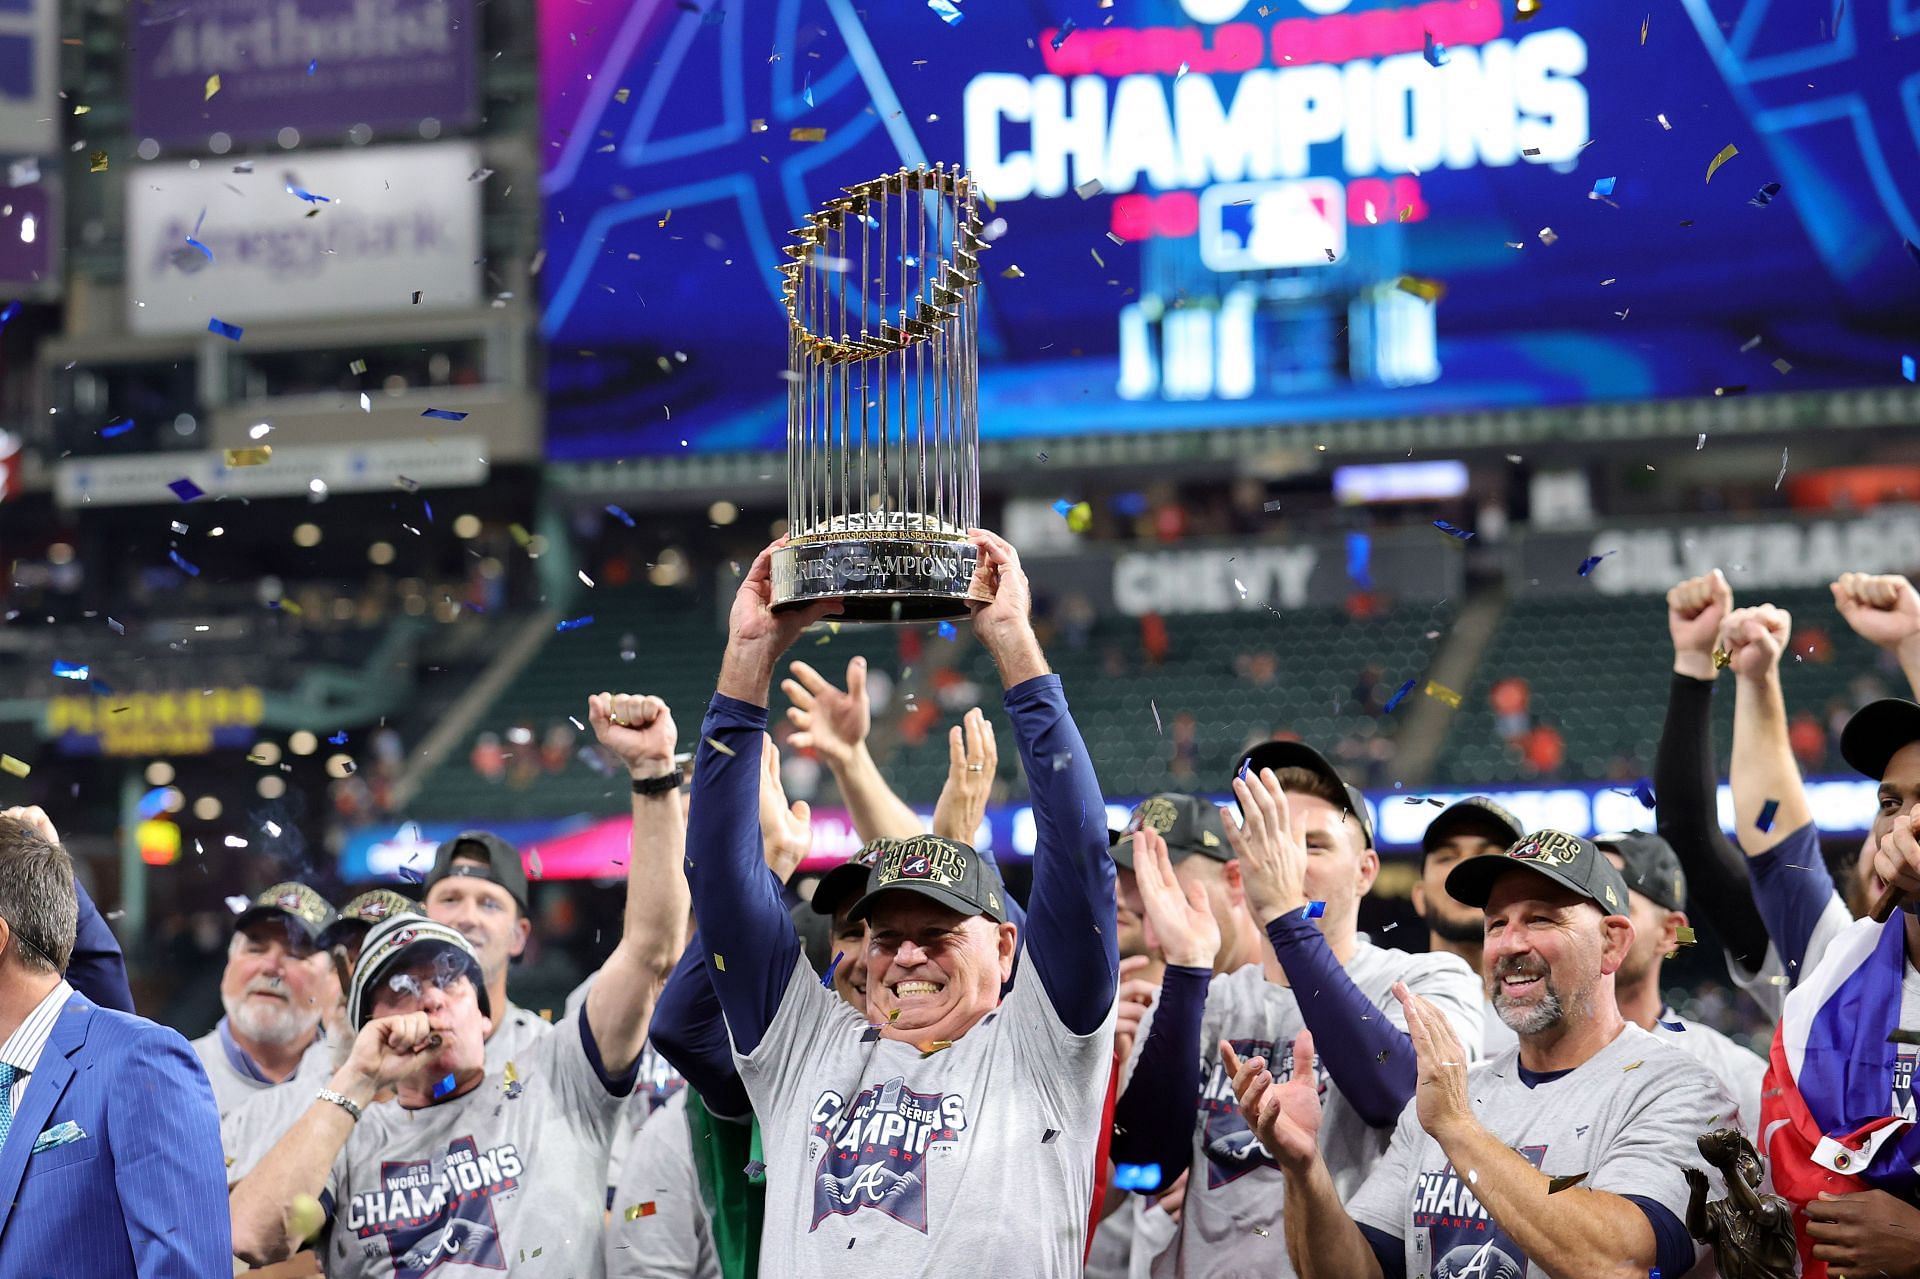 The Atlanta Braves are bringing the World Series Trophy to the Country  Music Hall of Fame and Museum on April 26